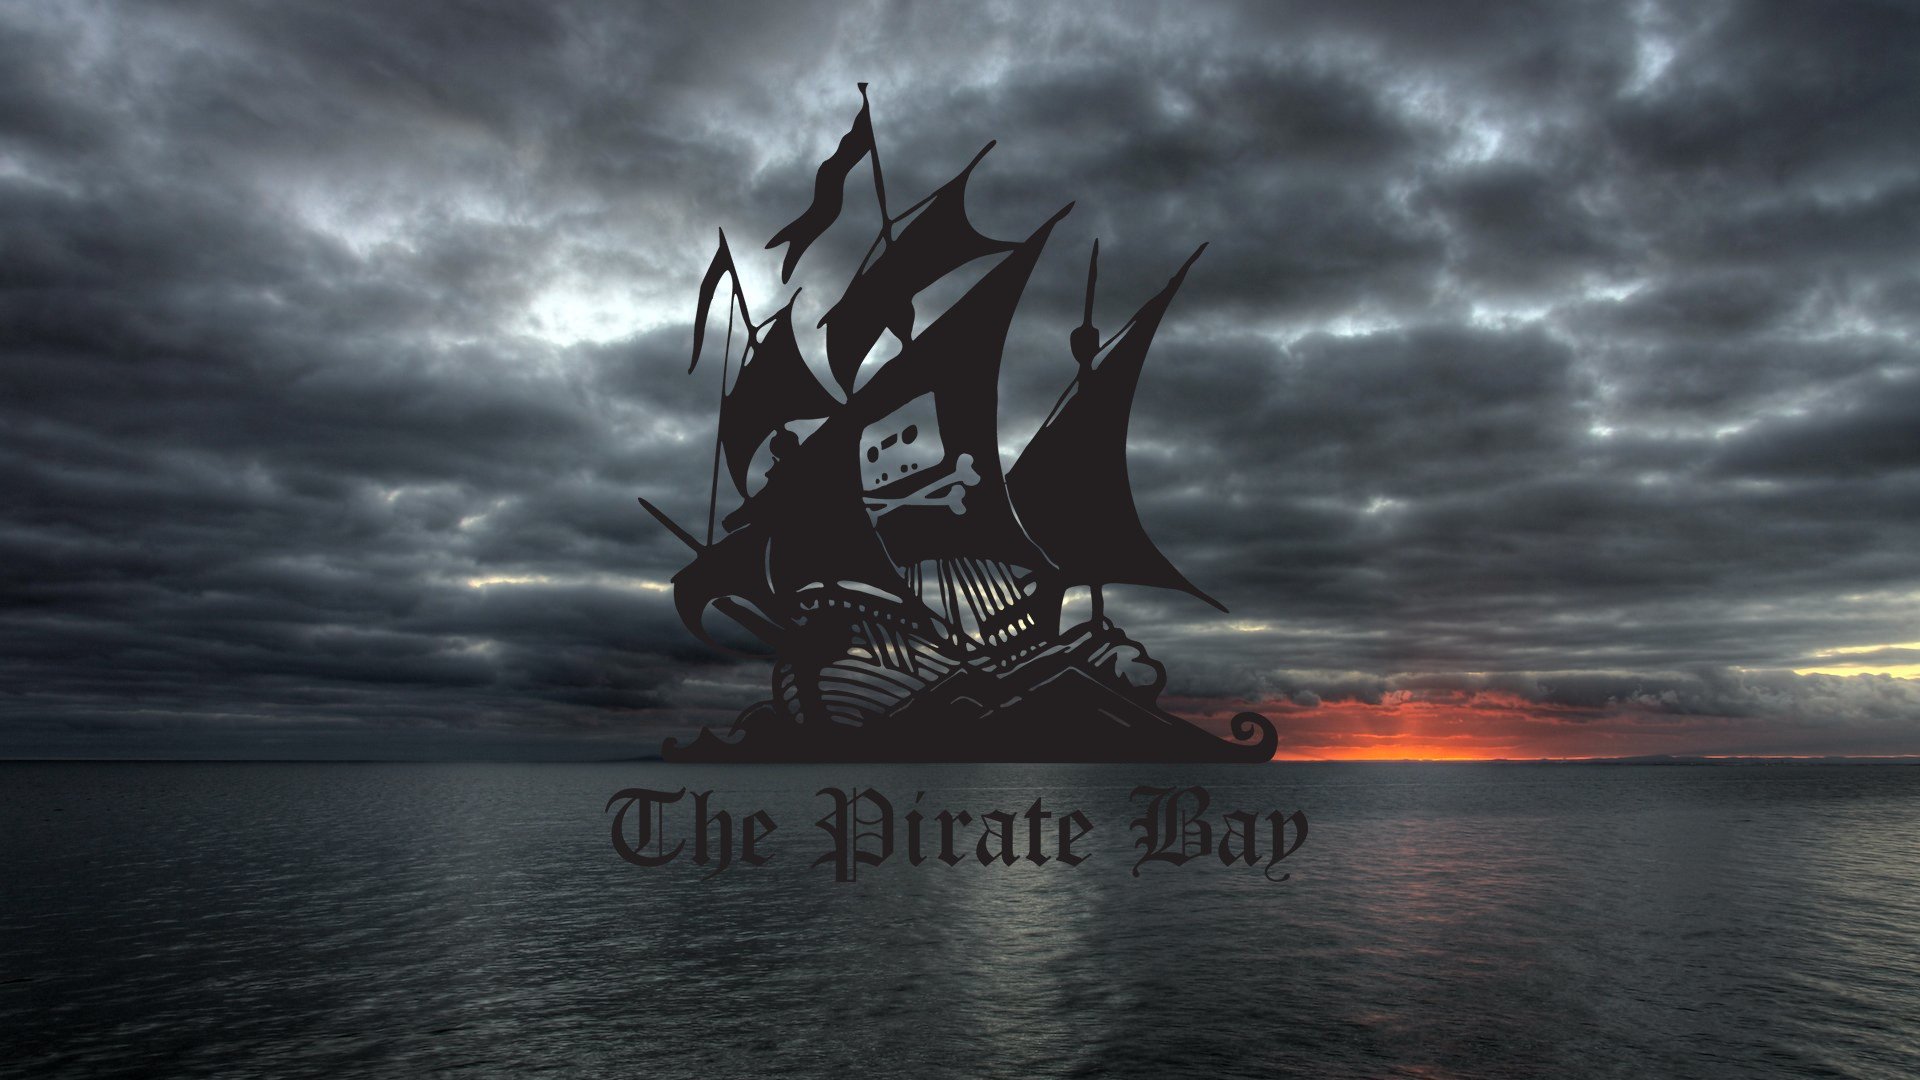 7 The Pirate Bay HD Wallpapers - Background Images - Wallpaper Abyss